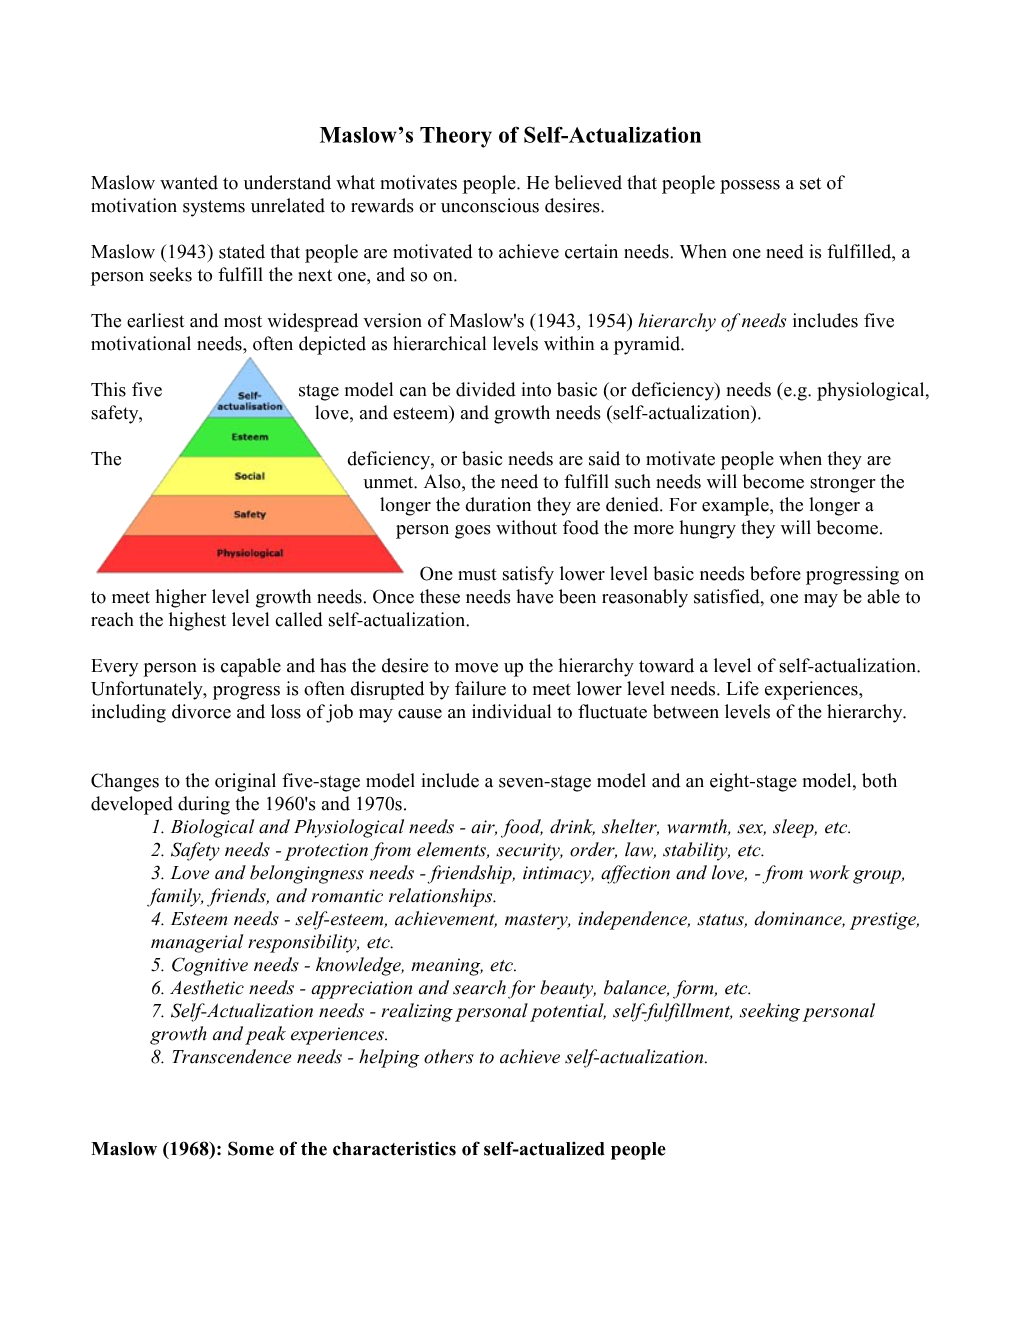 Maslow S Theory of Self-Actualization